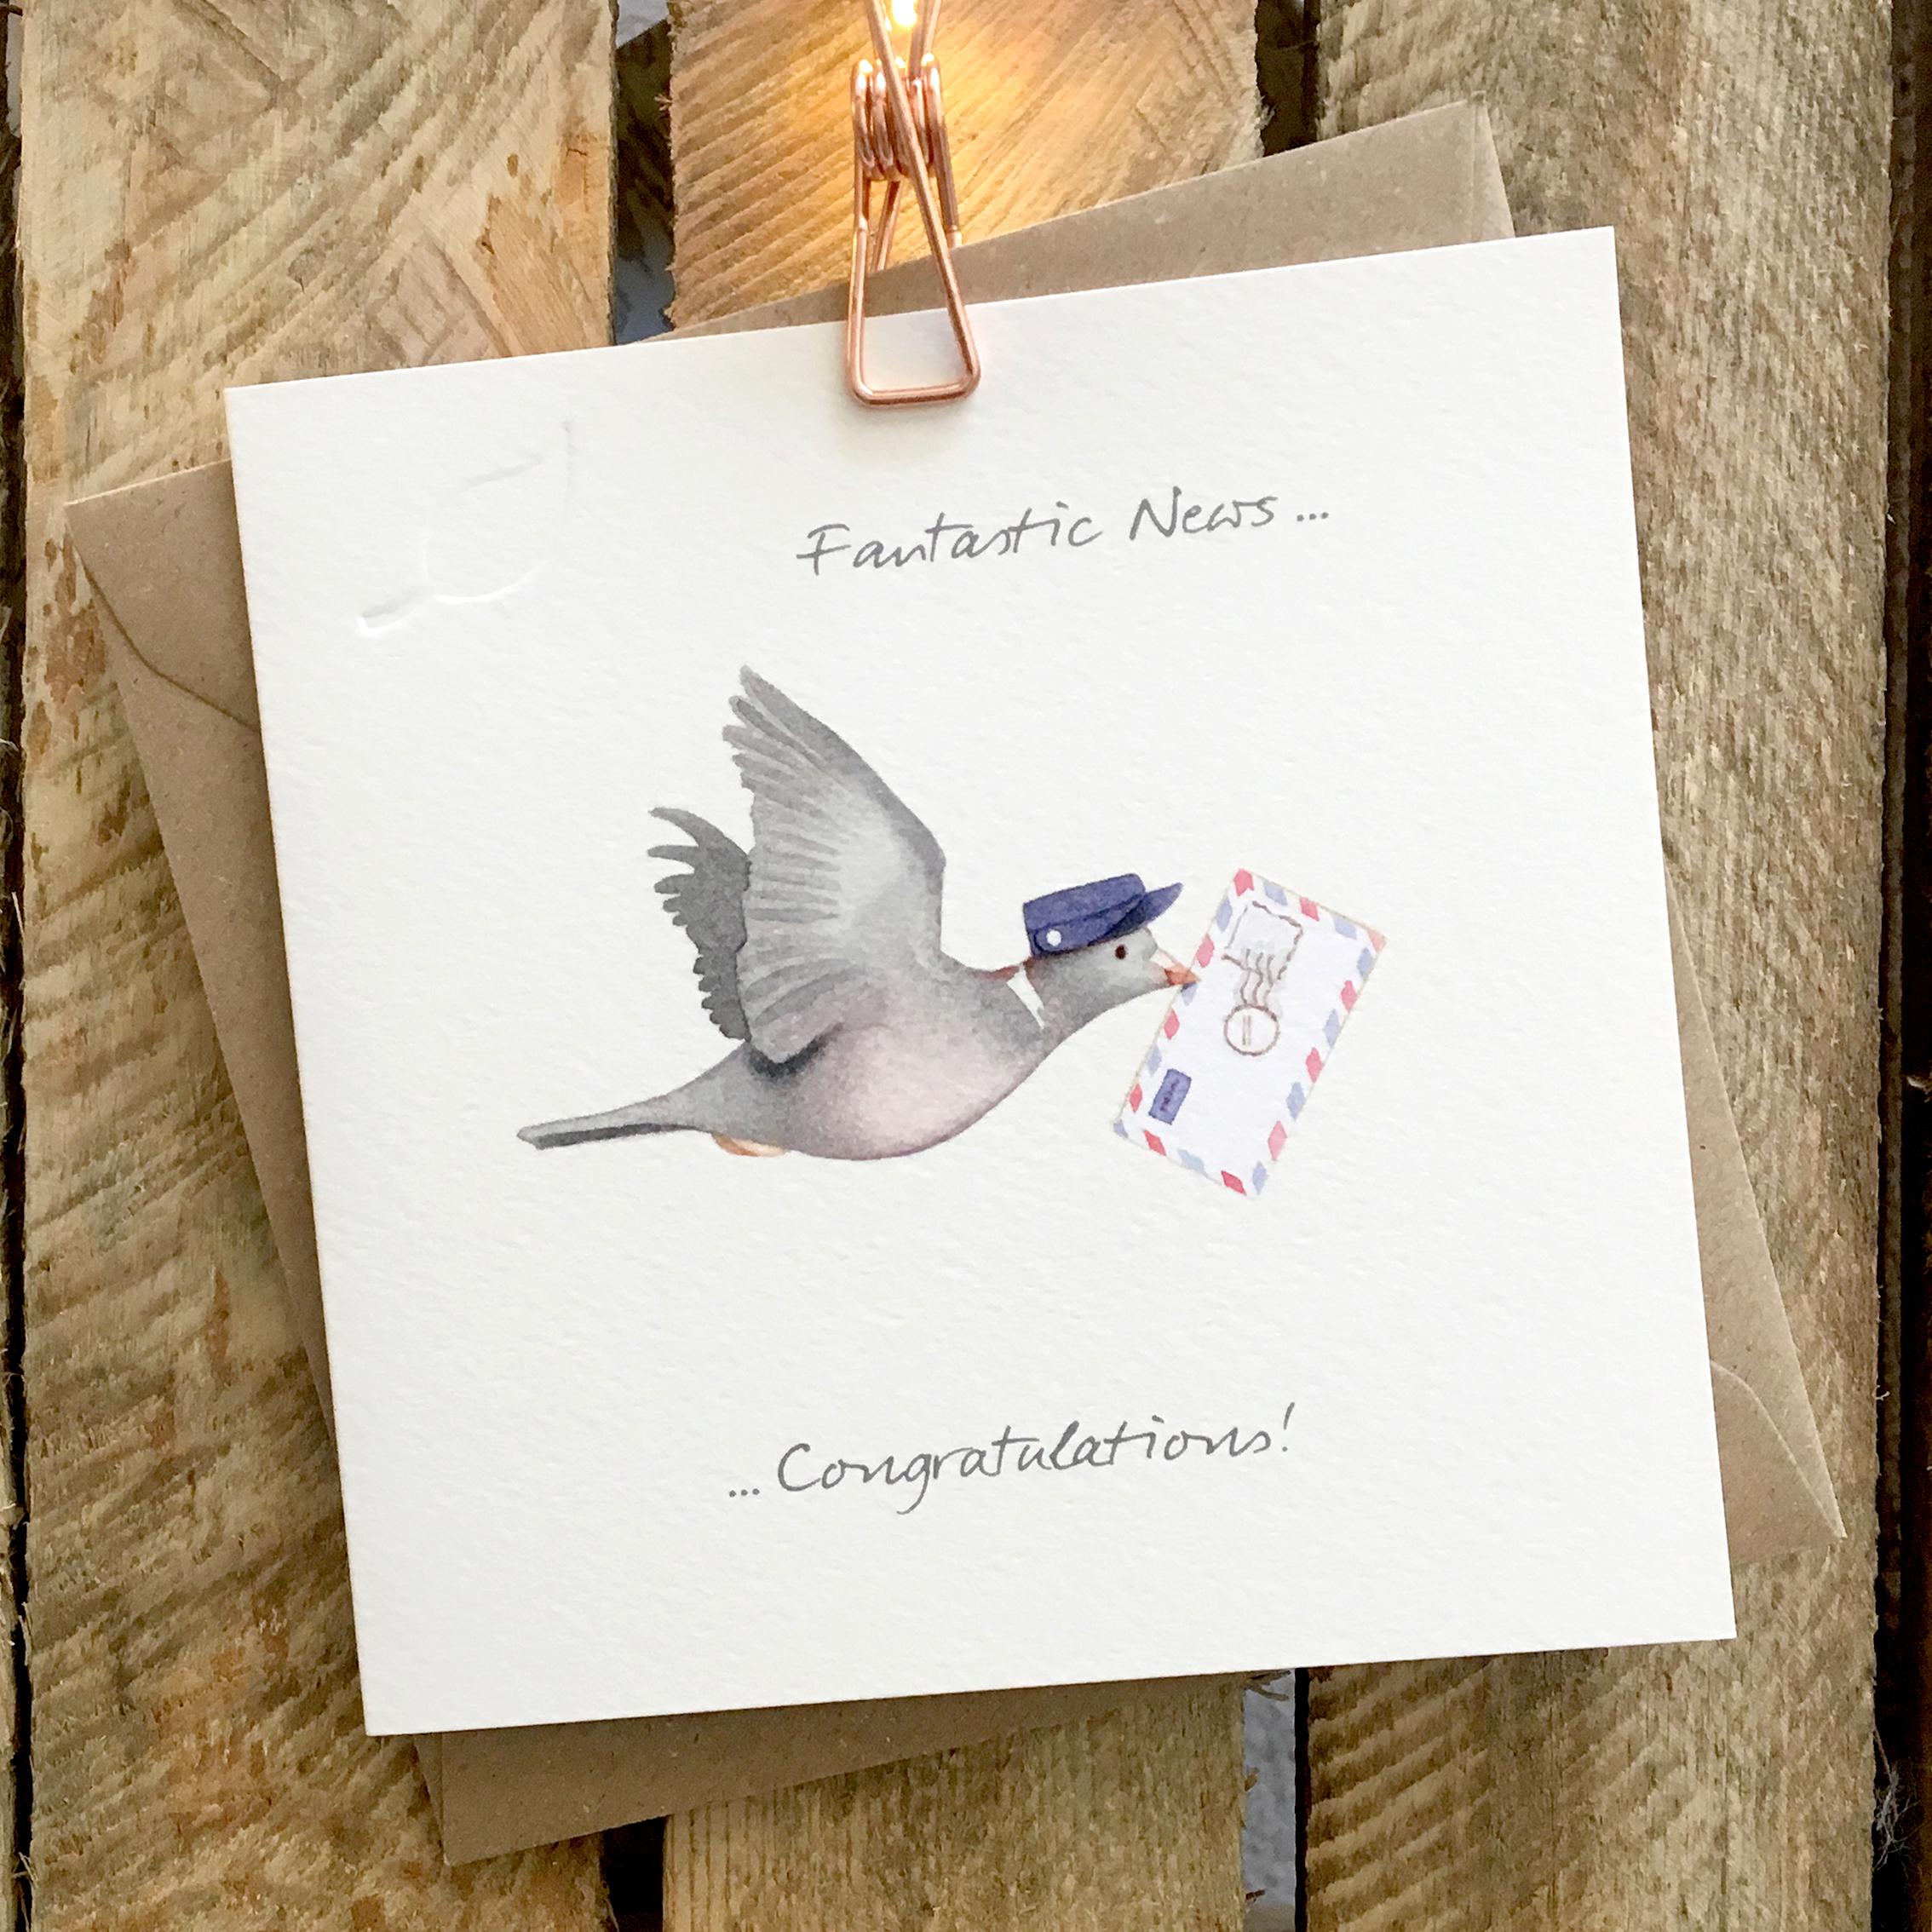 Card featuring cute flying pigeon, wearing a postman's hat, and carrying an airmail letter